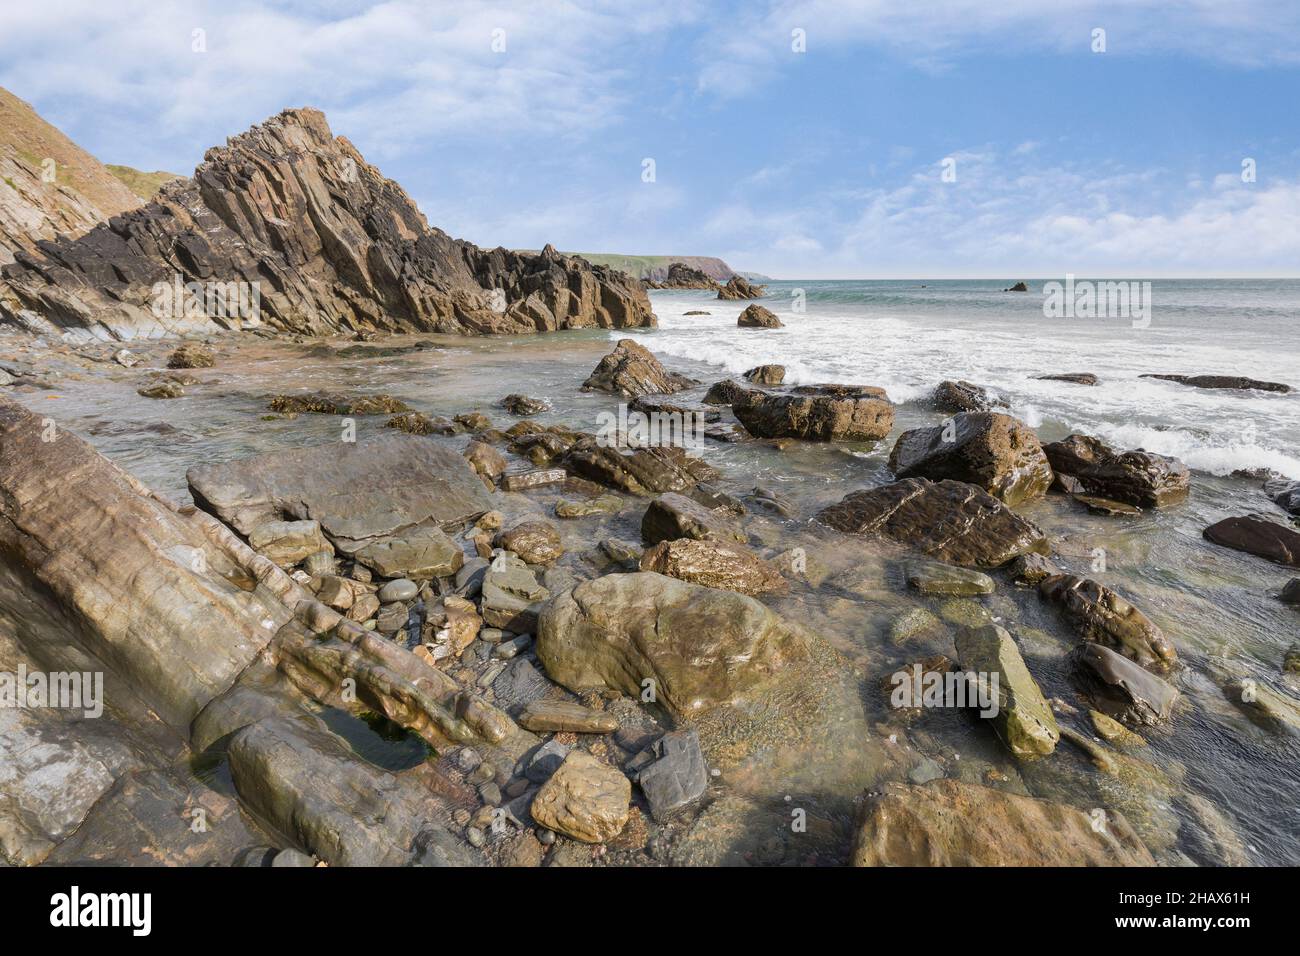 Rocky shore at Marloes Sands, Pembrokeshire, Wales, UK Stock Photo